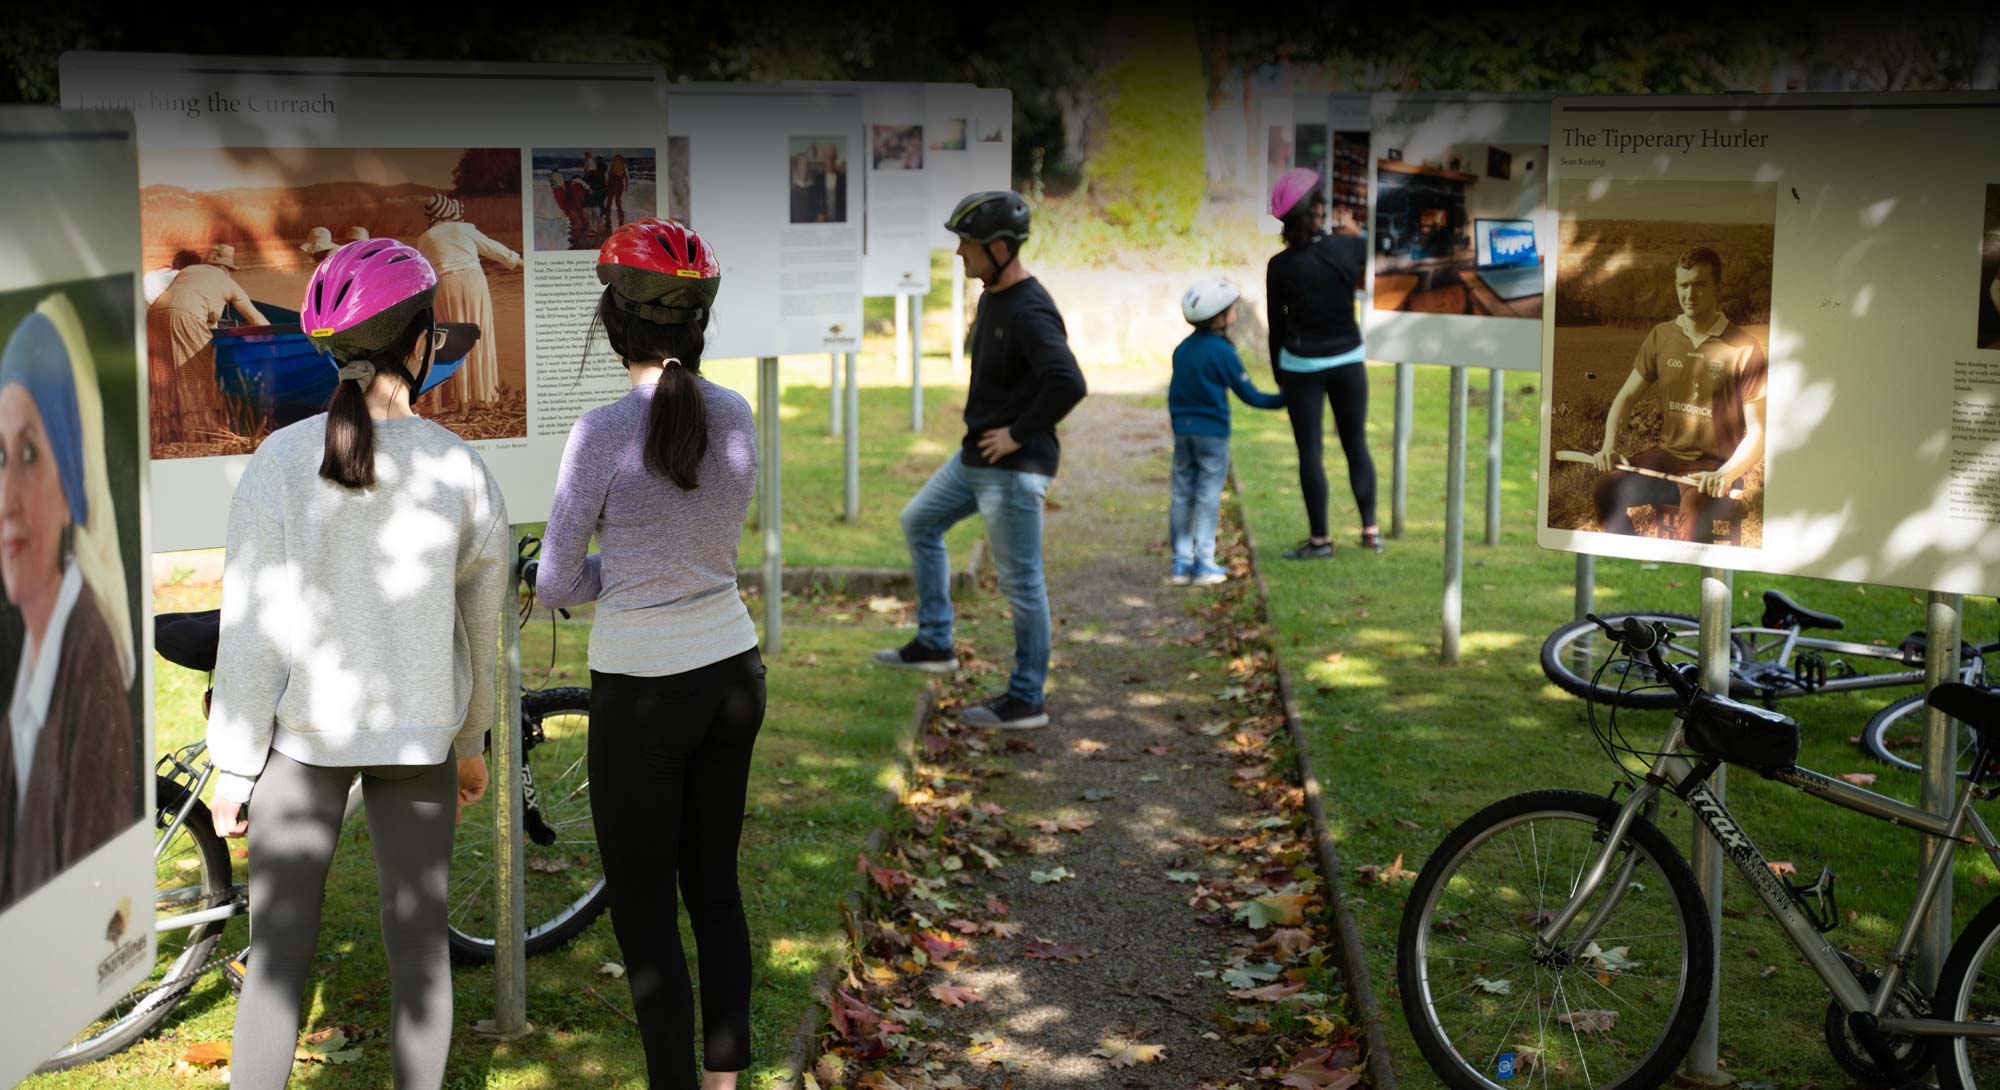 Explore Portumna's Culture by Bicycle - Dick's Bike Hire